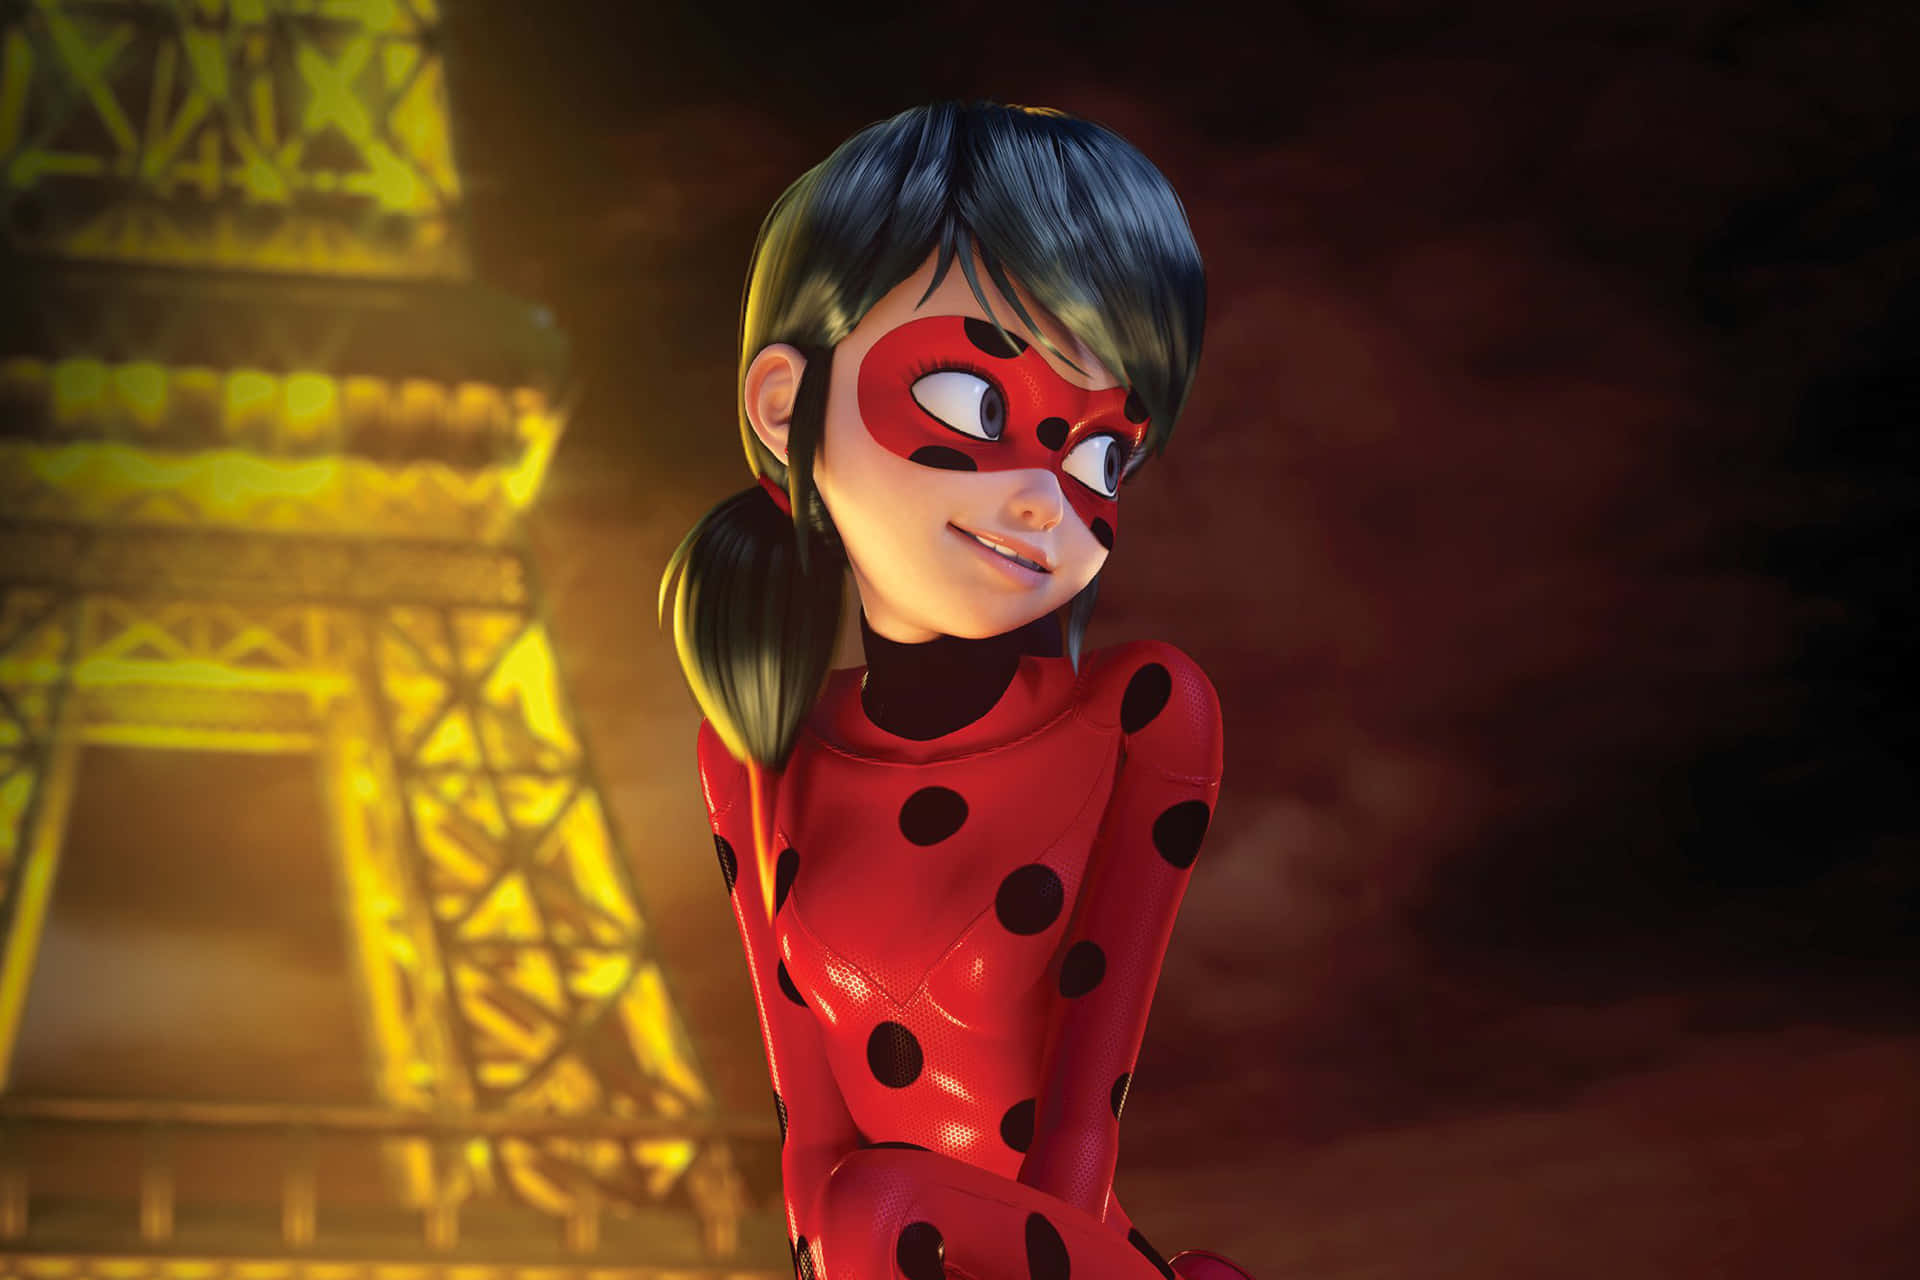 Ladybug and Cat Noir - the Miraculous duo